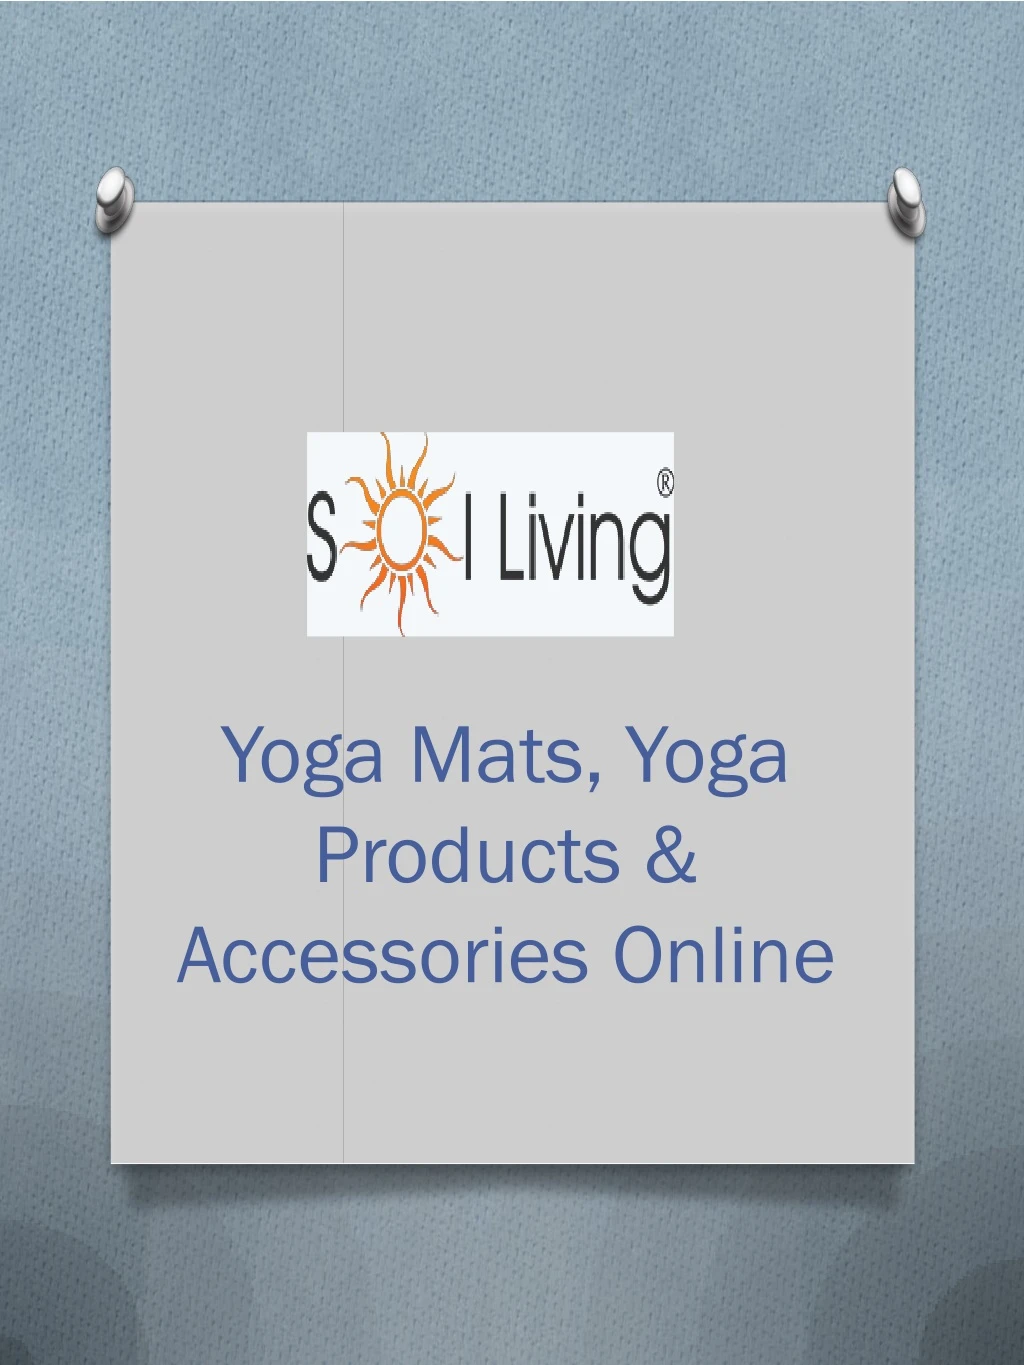 yoga mats yoga products accessories online